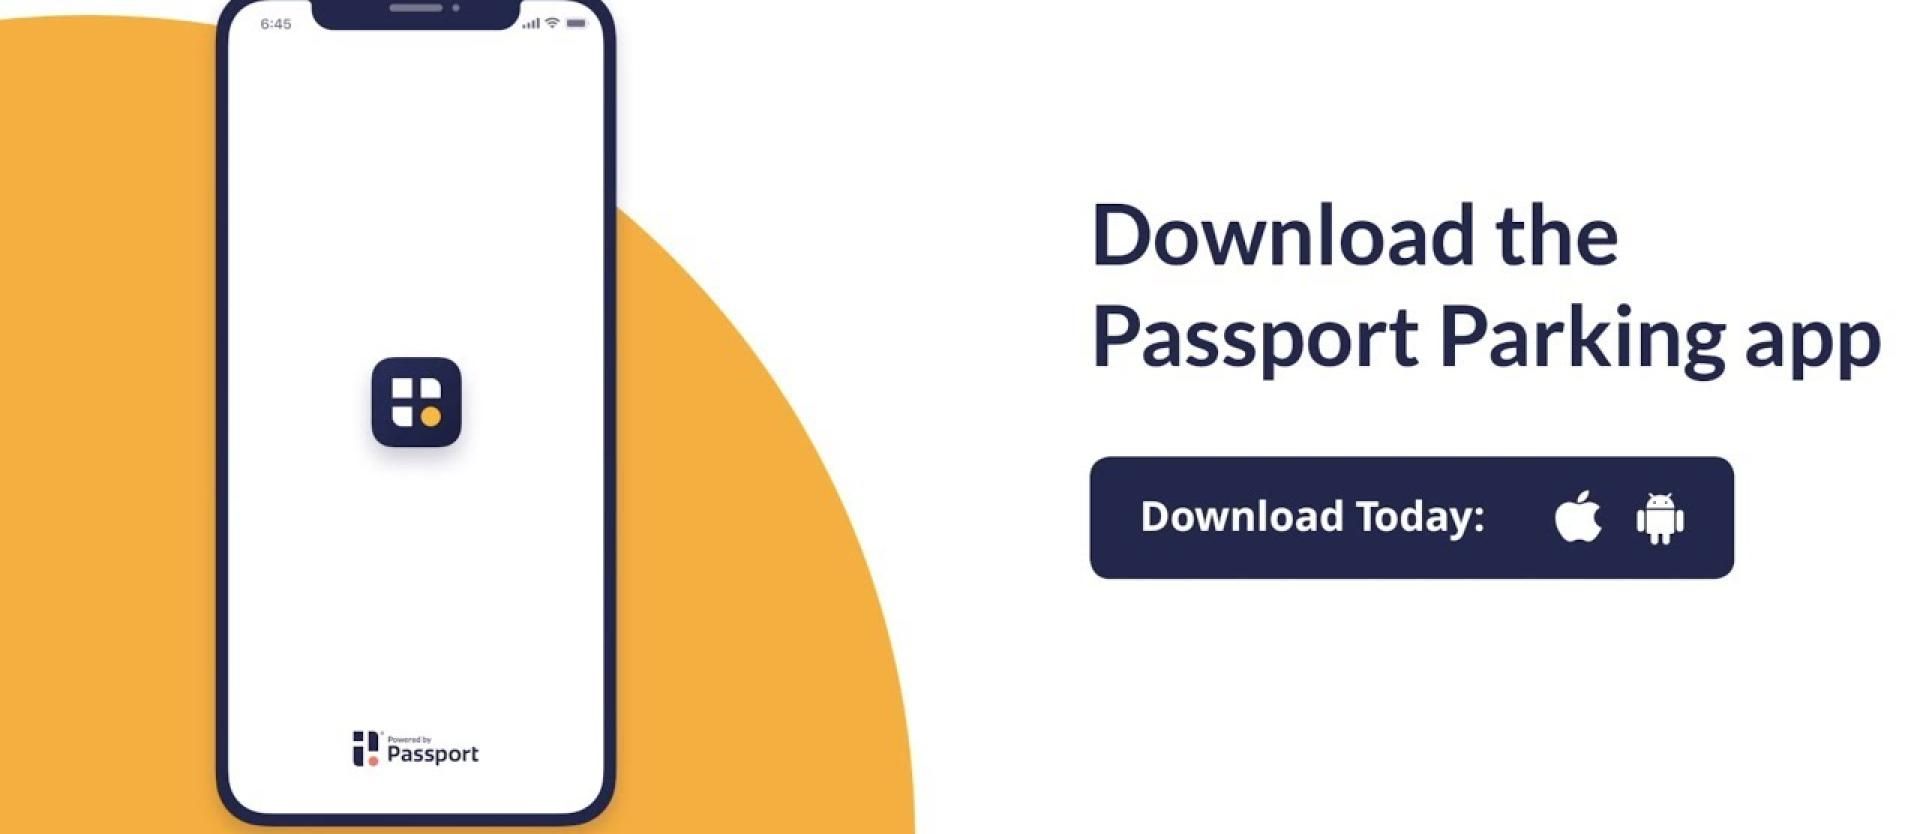 Youtube video showing how easy it is to use the Passport App